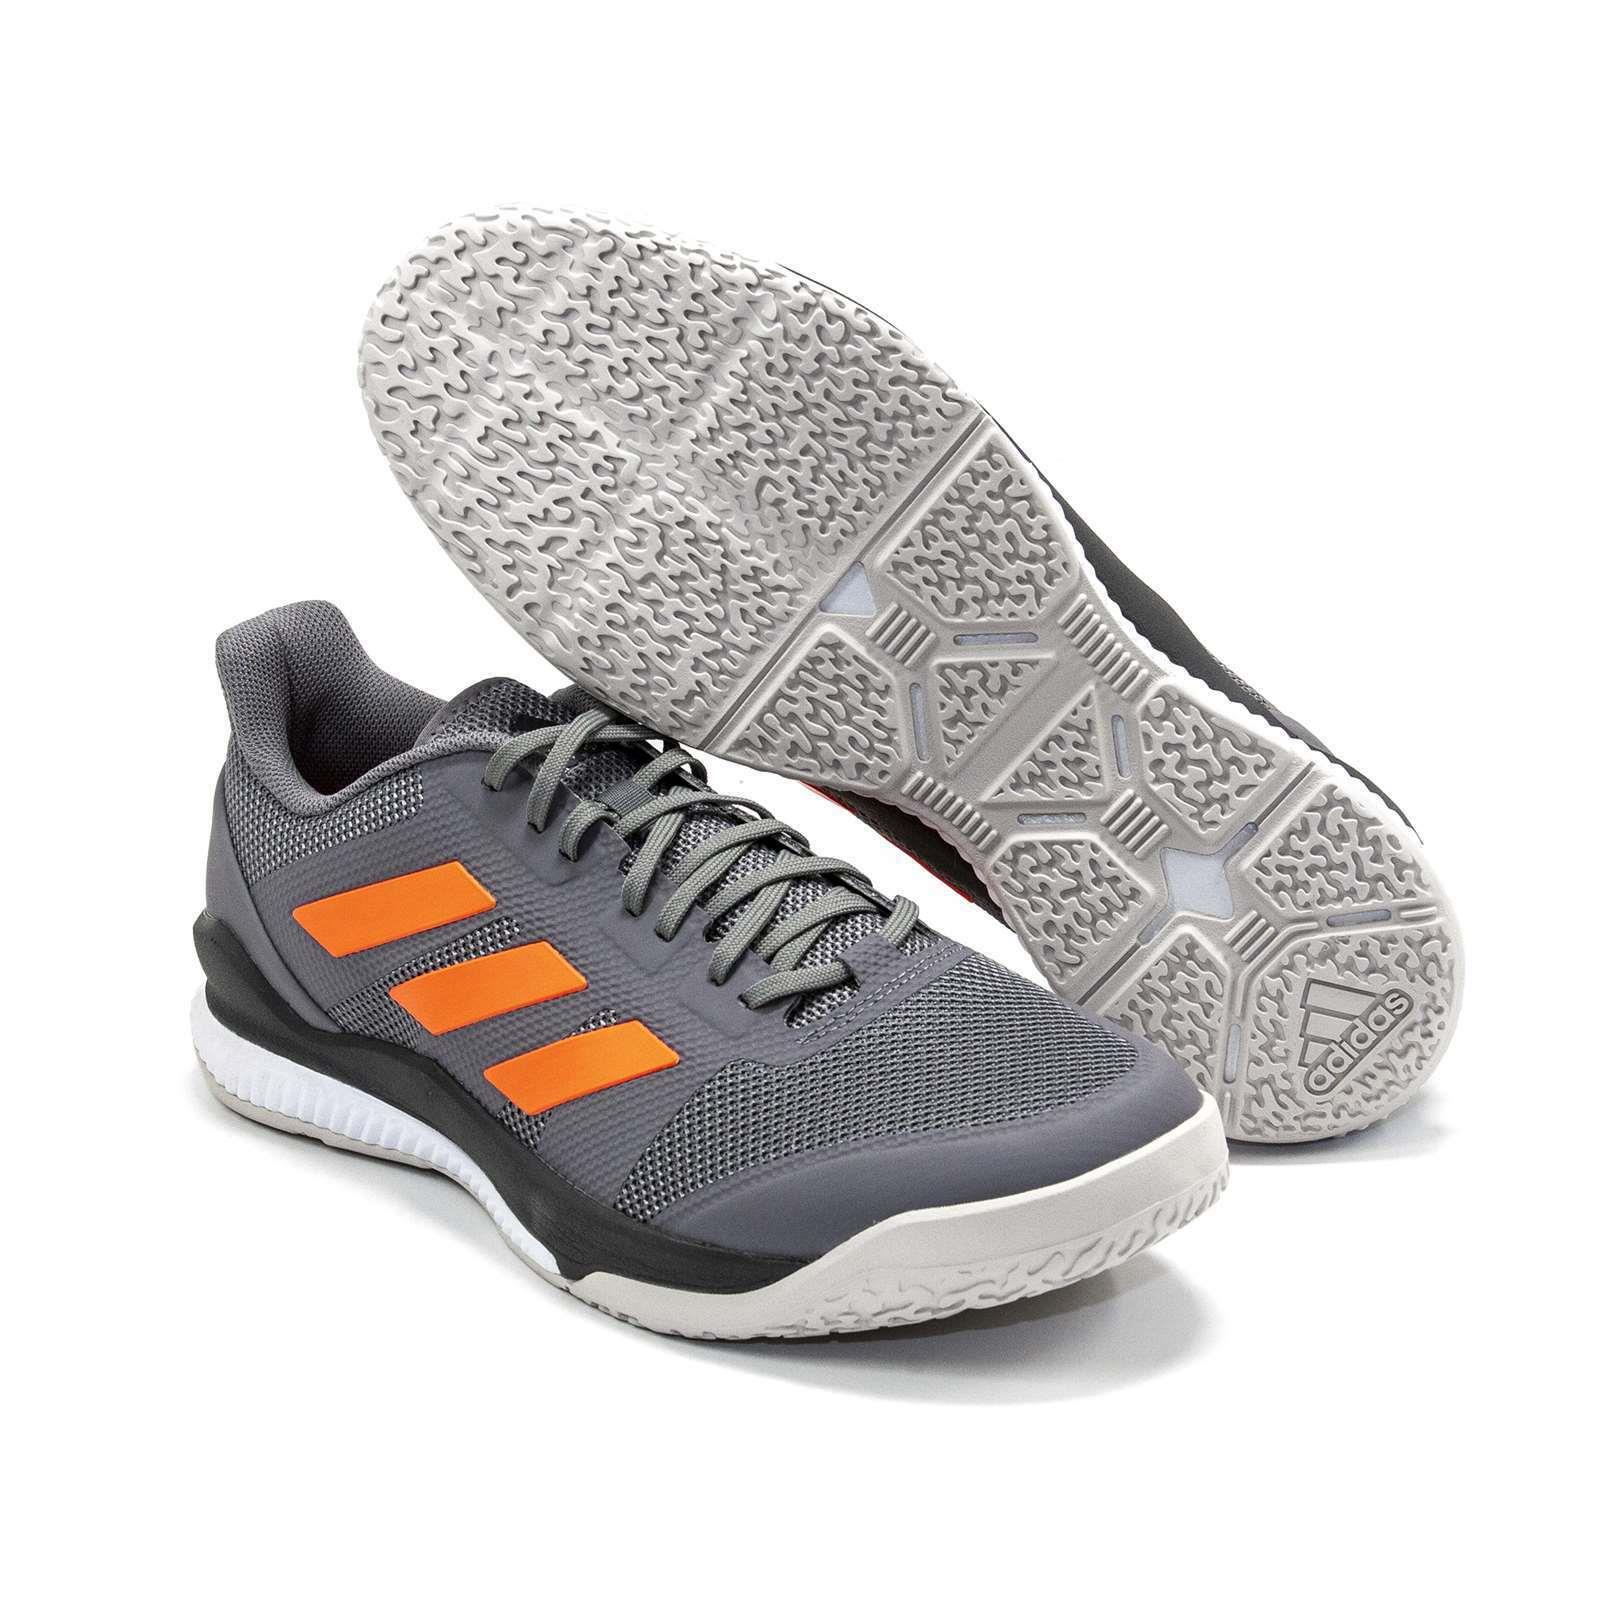 Mens Adidas Stabil Bounce Grey Athletic Shoes Handball Court Sneakers EH0847